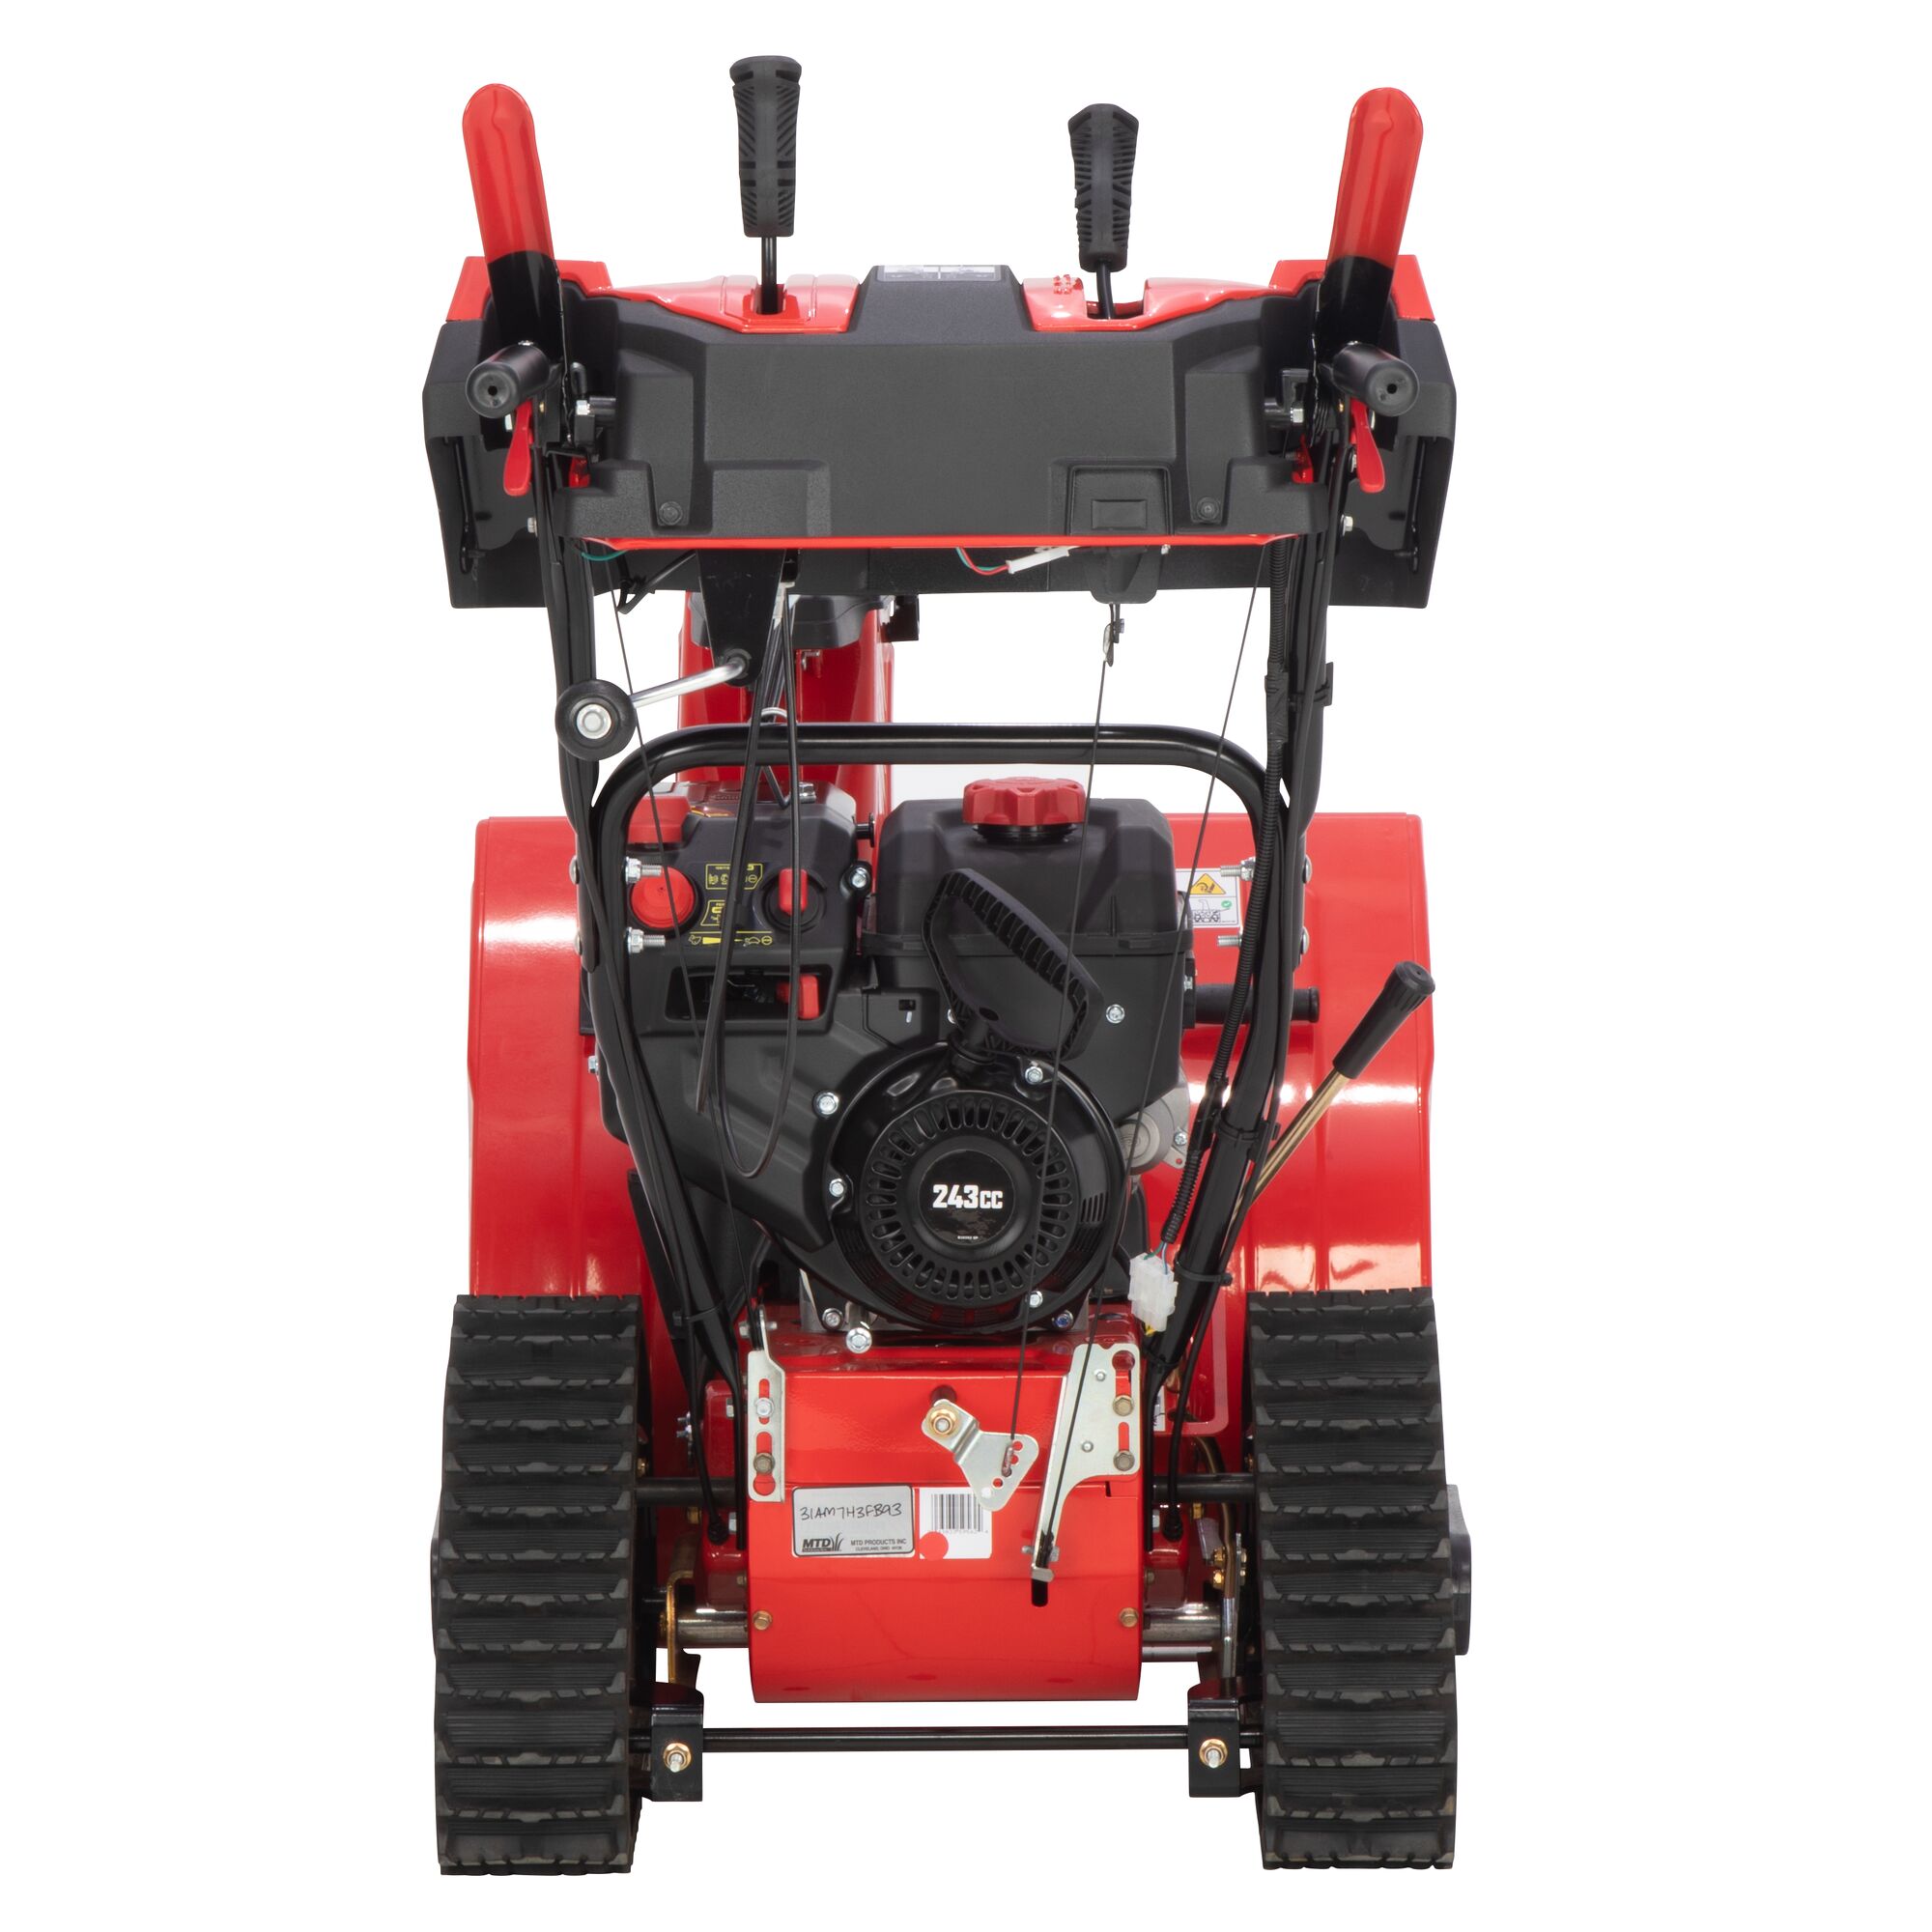 CRAFTSMAN Performance 26 Track Two-Stage Gas Snow Blower on white background